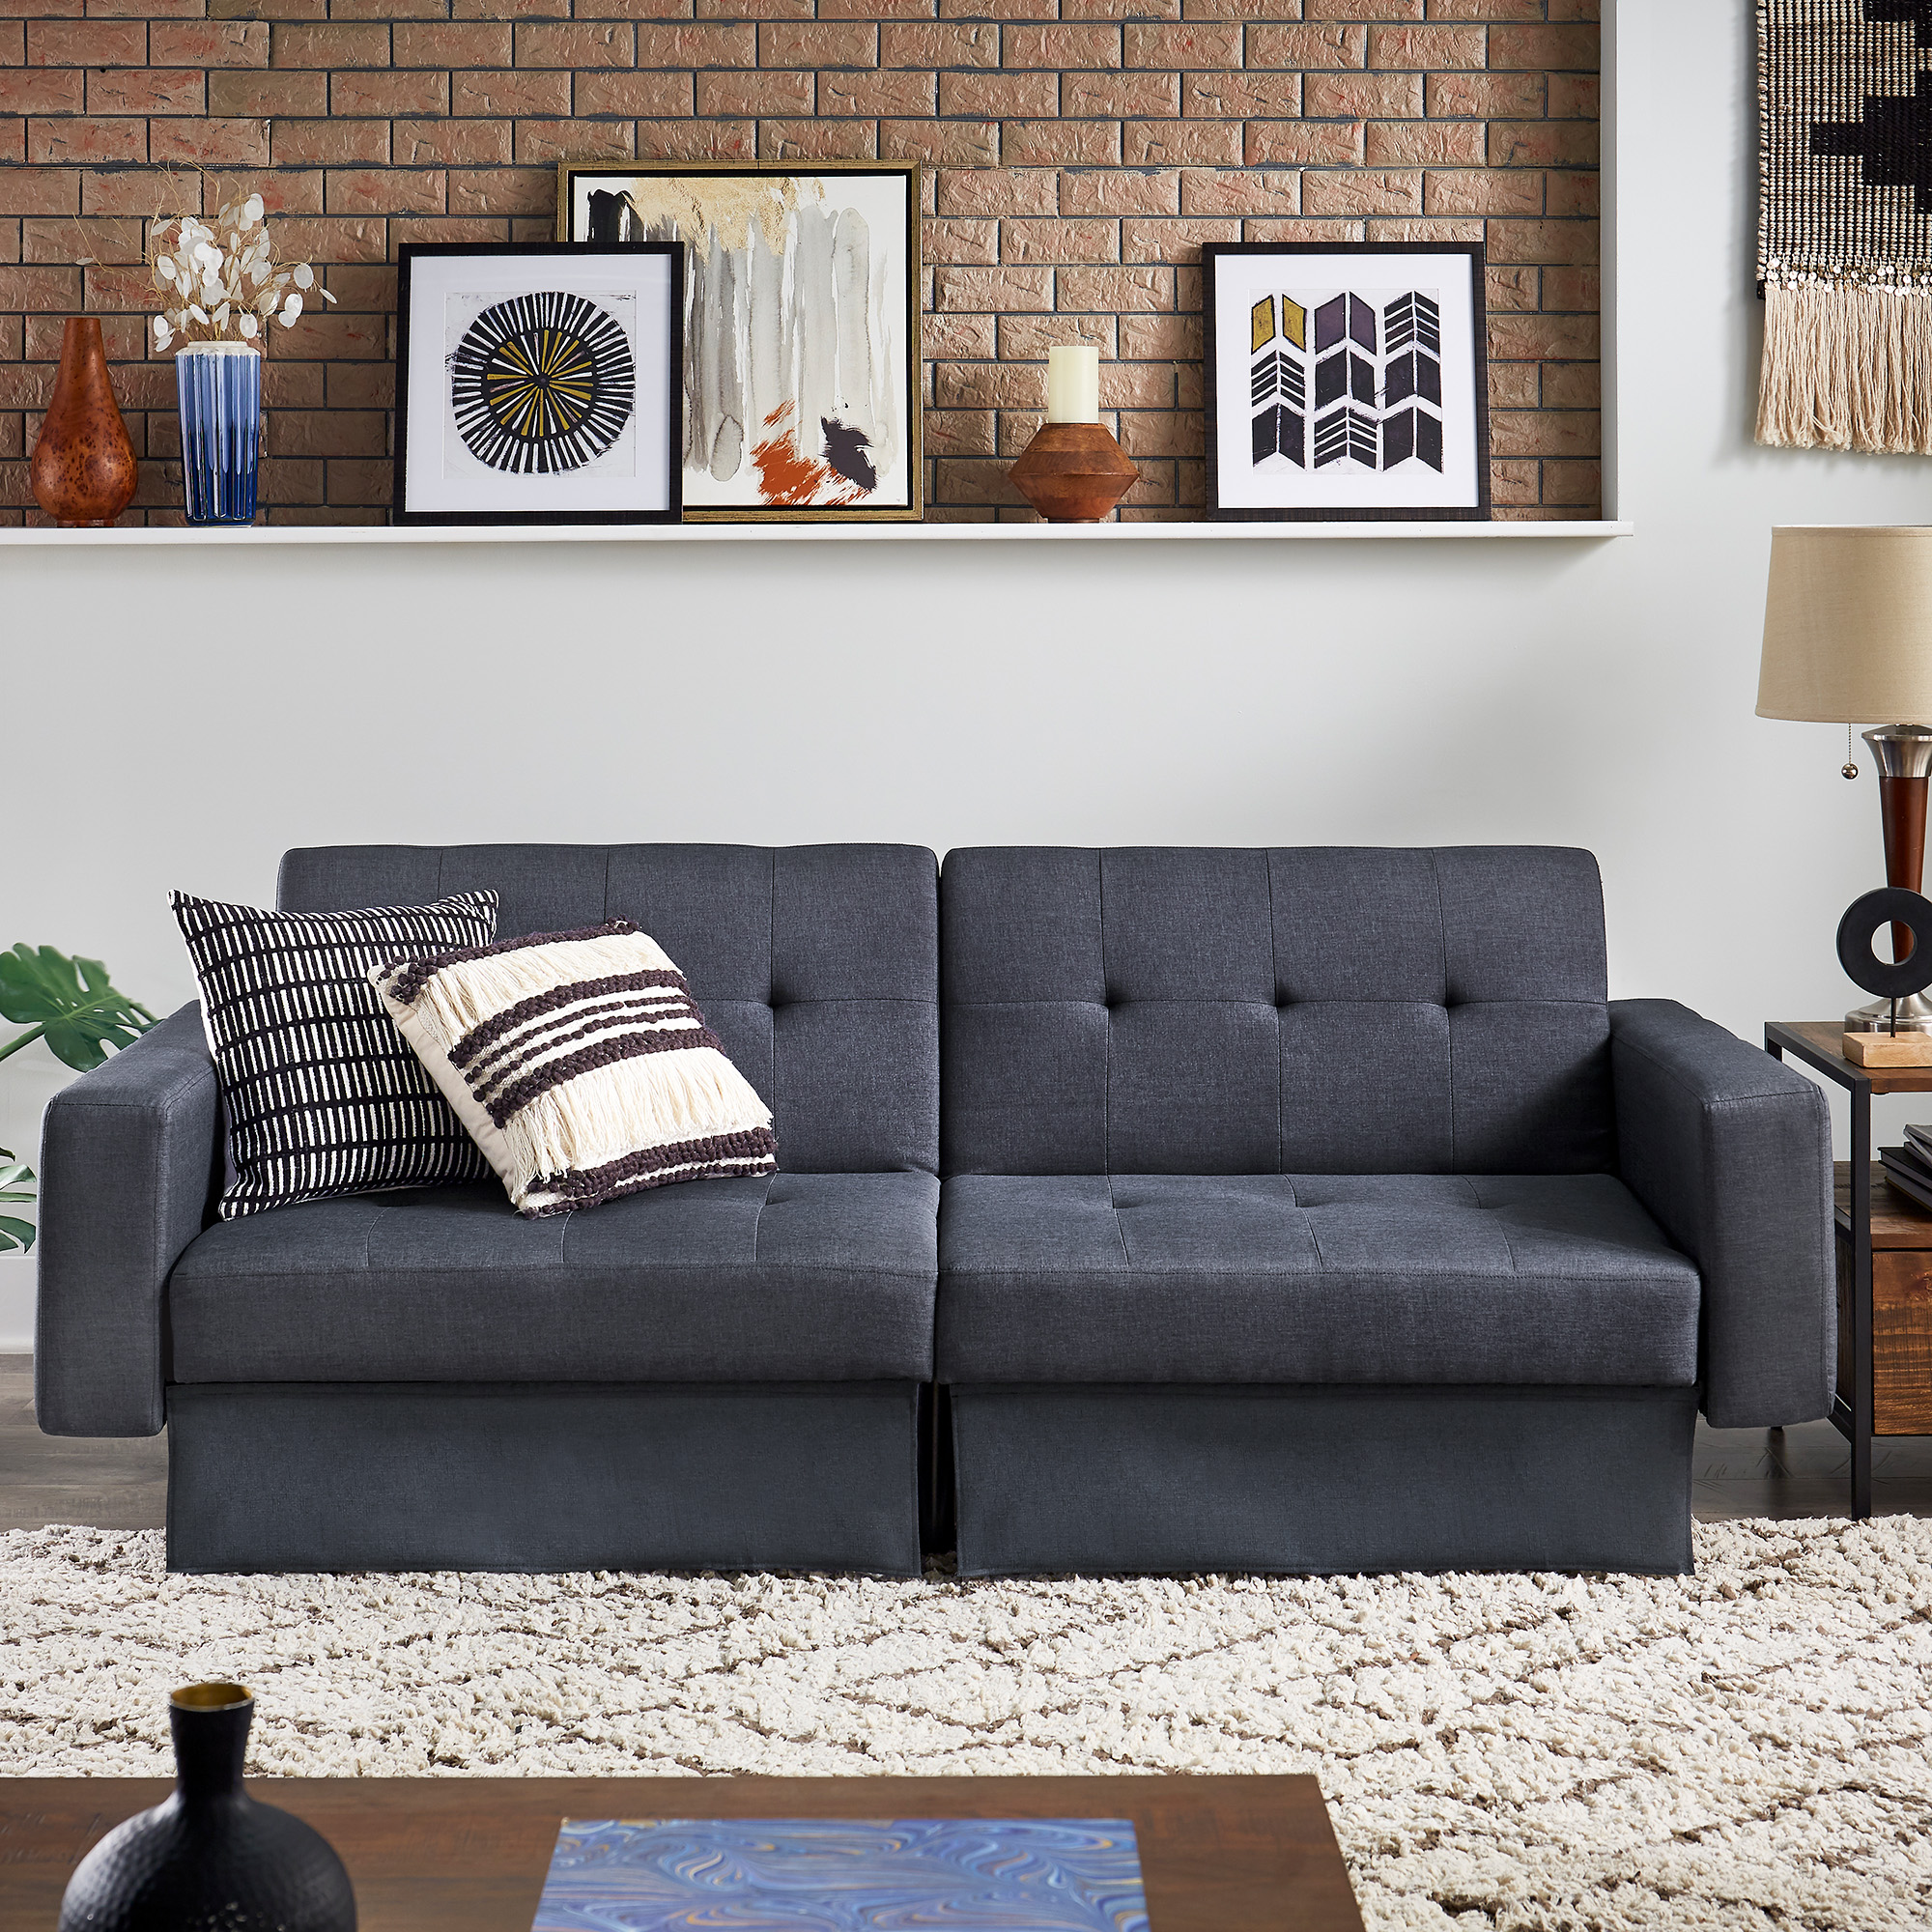 Full 80” Wide Tufted Fabric Convertible Futon